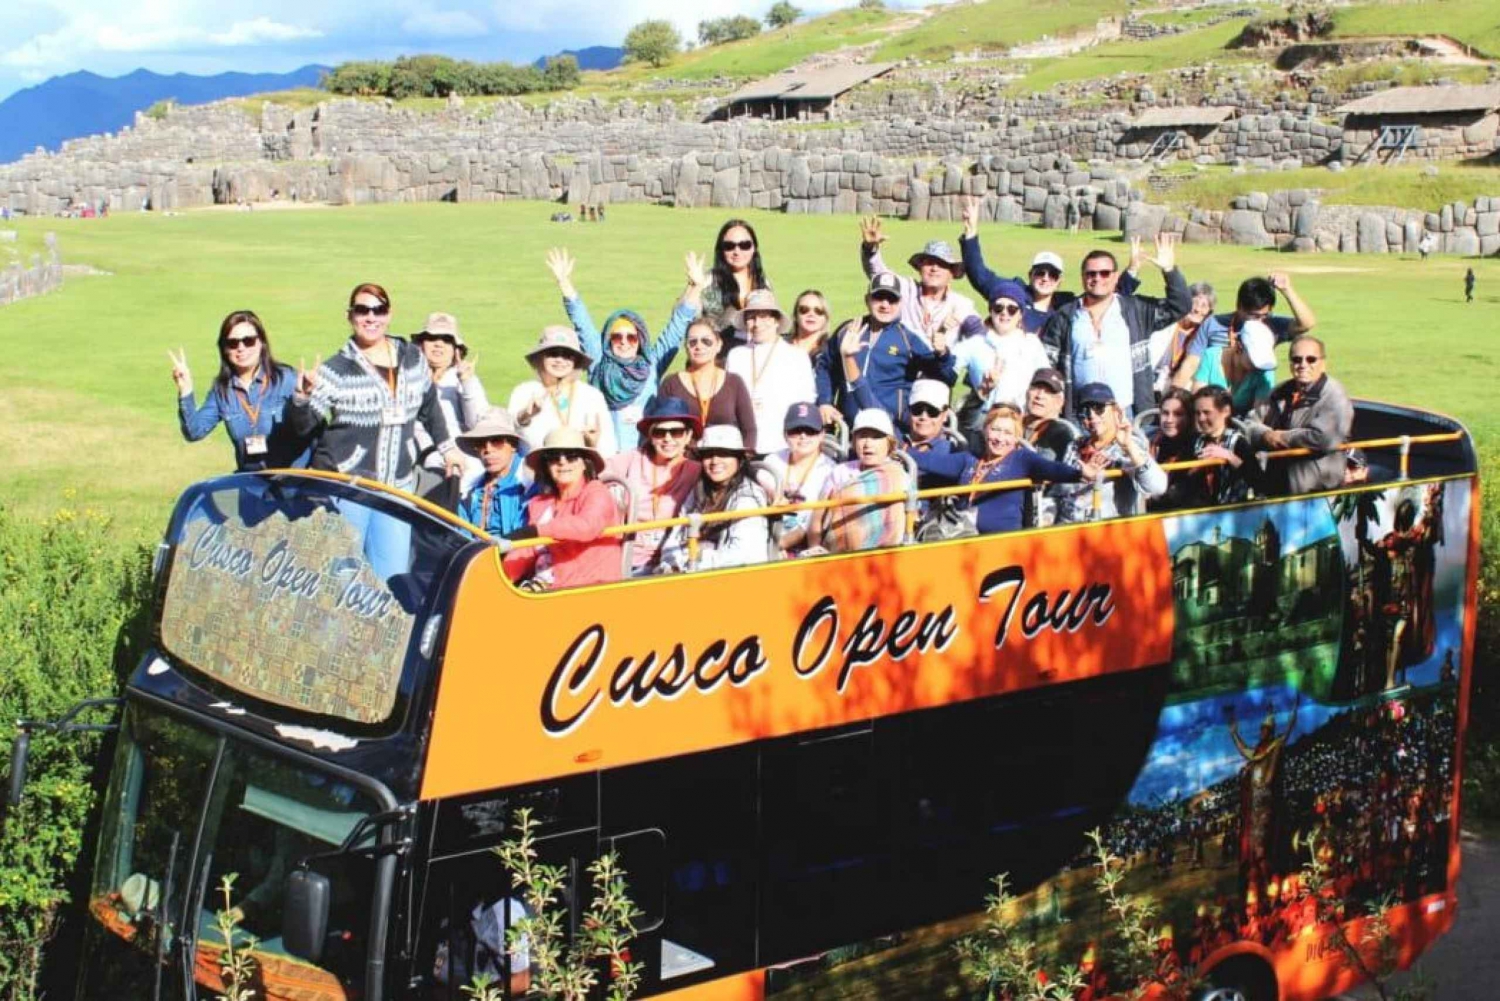 From Cusco | Panoramic Tour by Cusco + Show